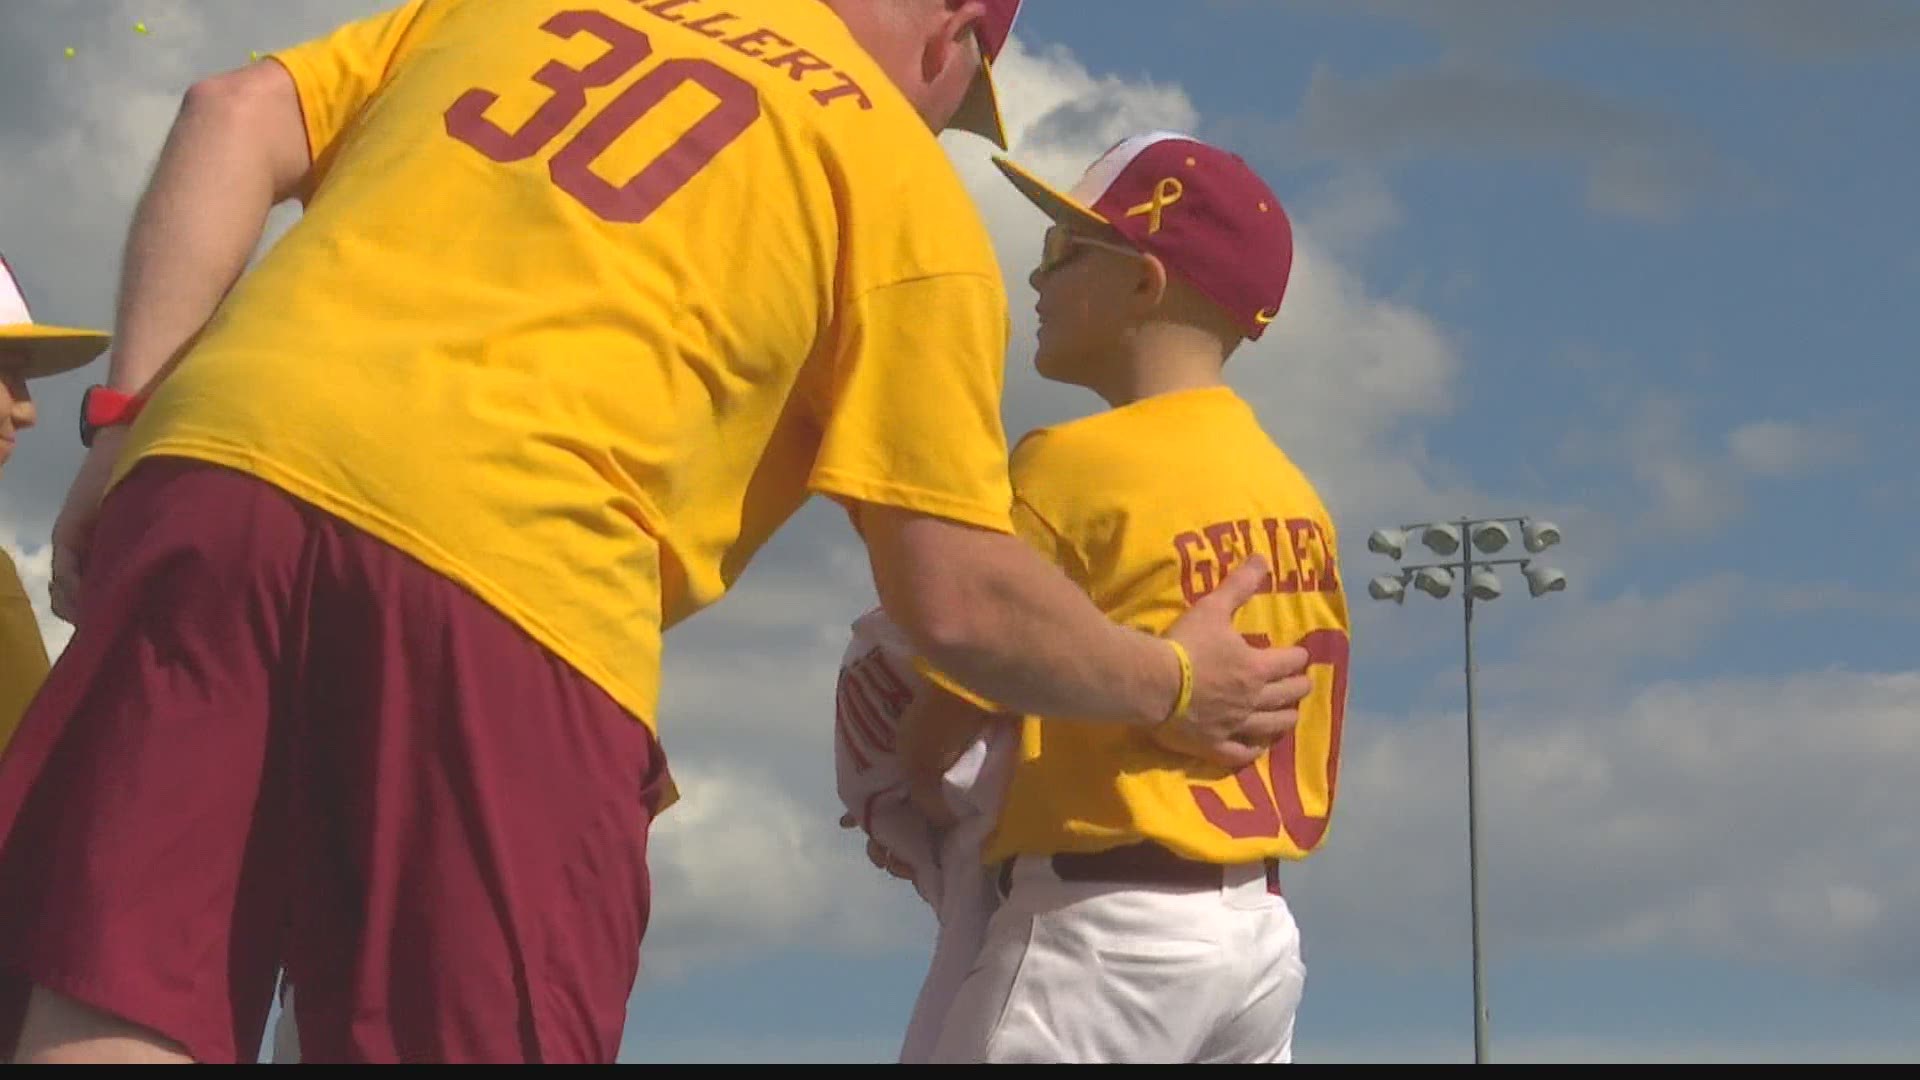 More than a dozen youth baseball teams came together at Westfield's Grand Park to celebrate Logan Gellert, who is fighting cancer.